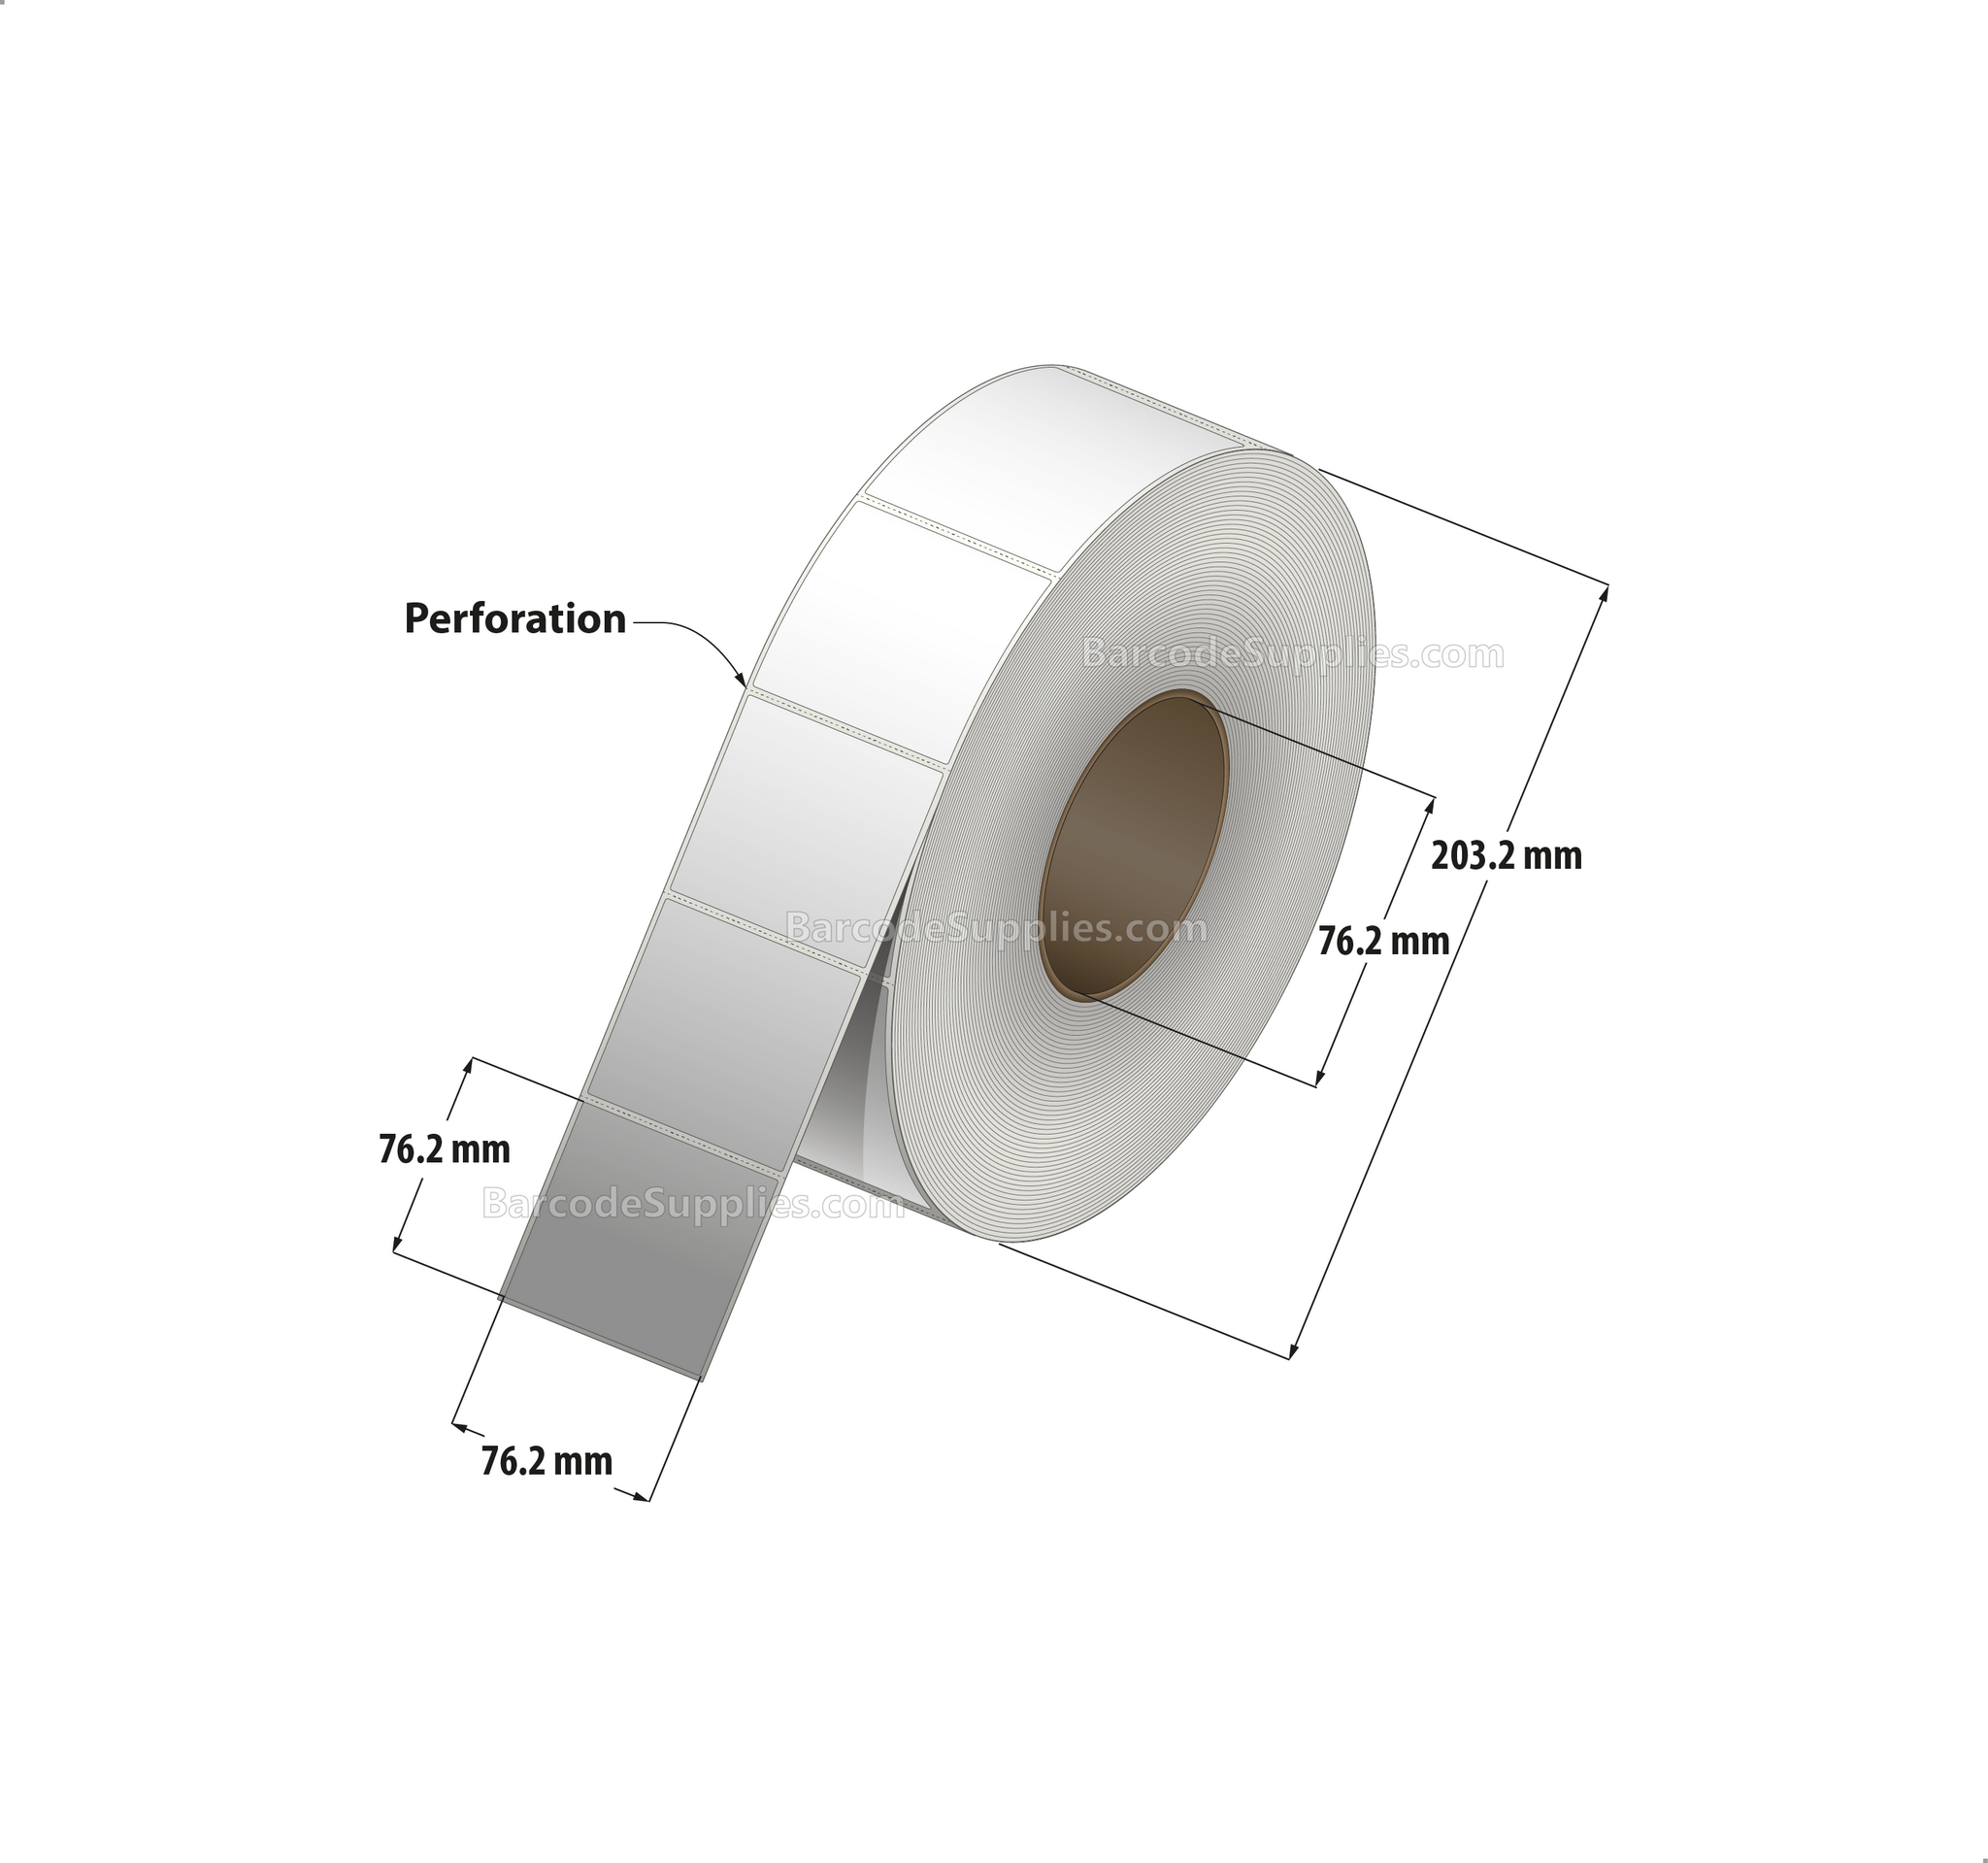 3 x 3 Direct Thermal White Labels With Acrylic Adhesive - Perforated - 1900 Labels Per Roll - Carton Of 8 Rolls - 15200 Labels Total - MPN: RD-3-3-1900-3 - BarcodeSource, Inc.